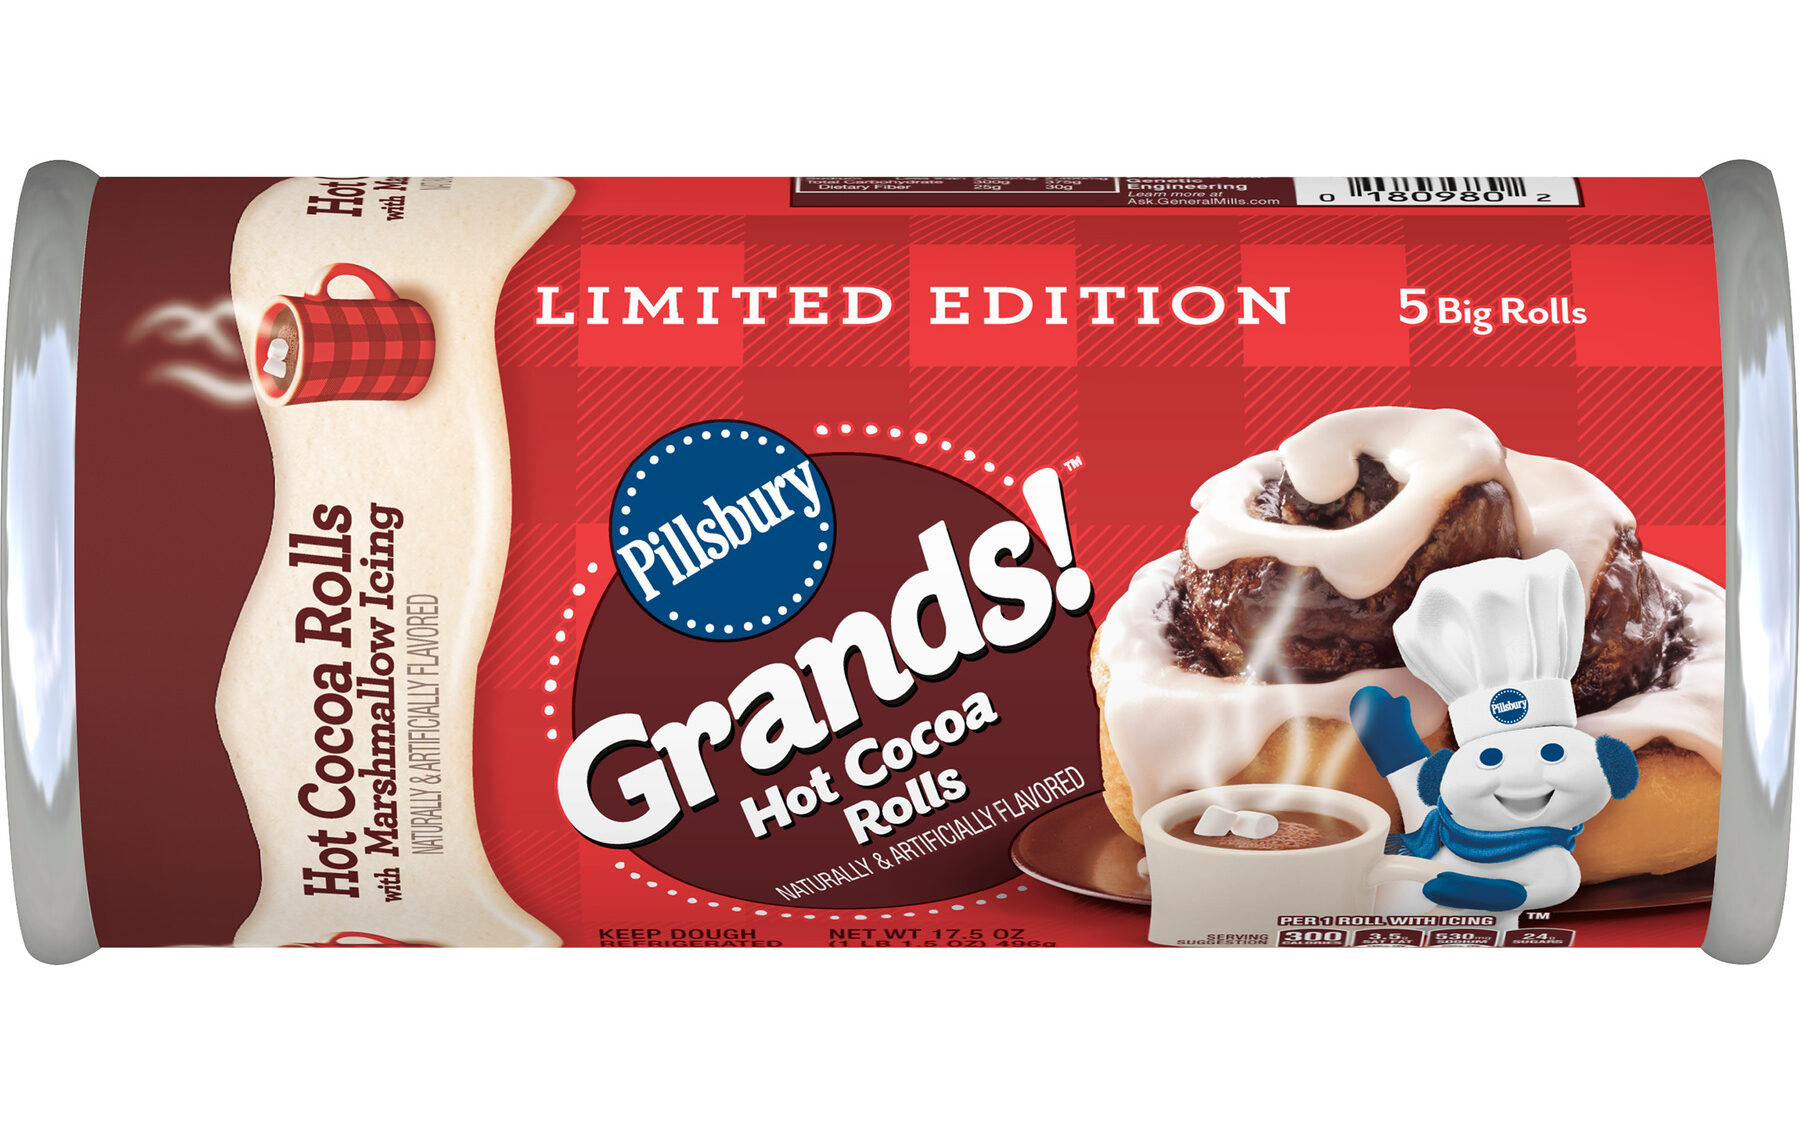 Pillsbury’s Hot Cocoa Rolls Are Covered In Marshmallow Icing And I Want Them Now